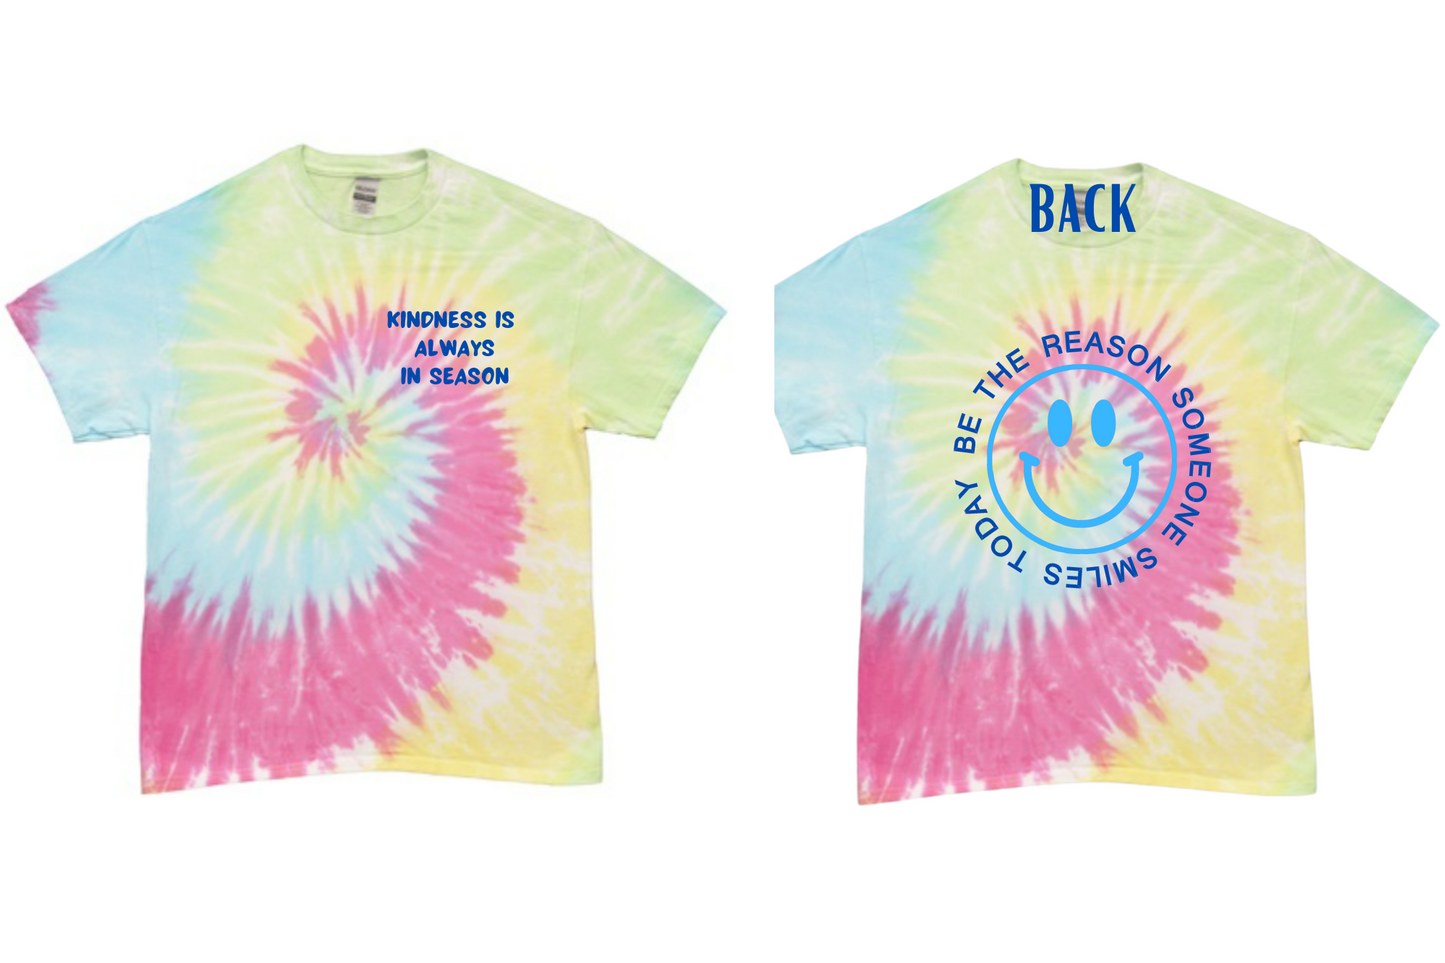 tie dye short sleeve shirt with "kindness is always in season" on the left chest area of the shirt and Community Grace on the sleeve in navy blue tones. On the back of the shirt there is a smiley face in a vibrant electric blue color with the words "BE THE REASON SOMEONE SMILES TODAY" around it in capital letters in a navy blue tone